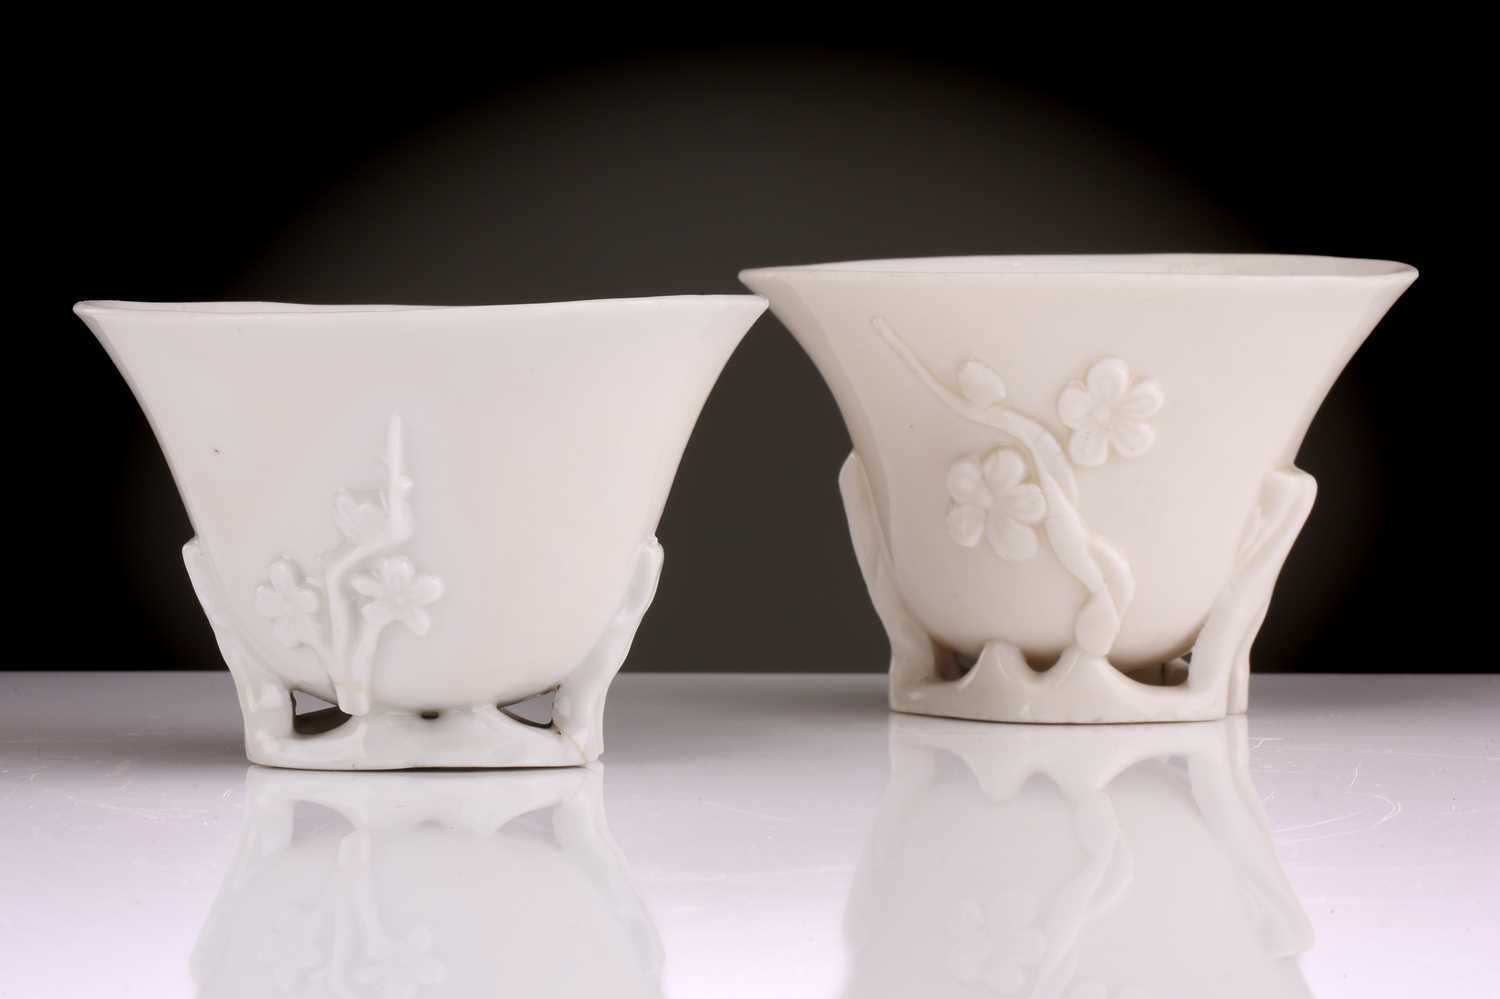 Two Chinese Dehua blanc de chine libation cups, Qing dynasty, 18th century, each with applied